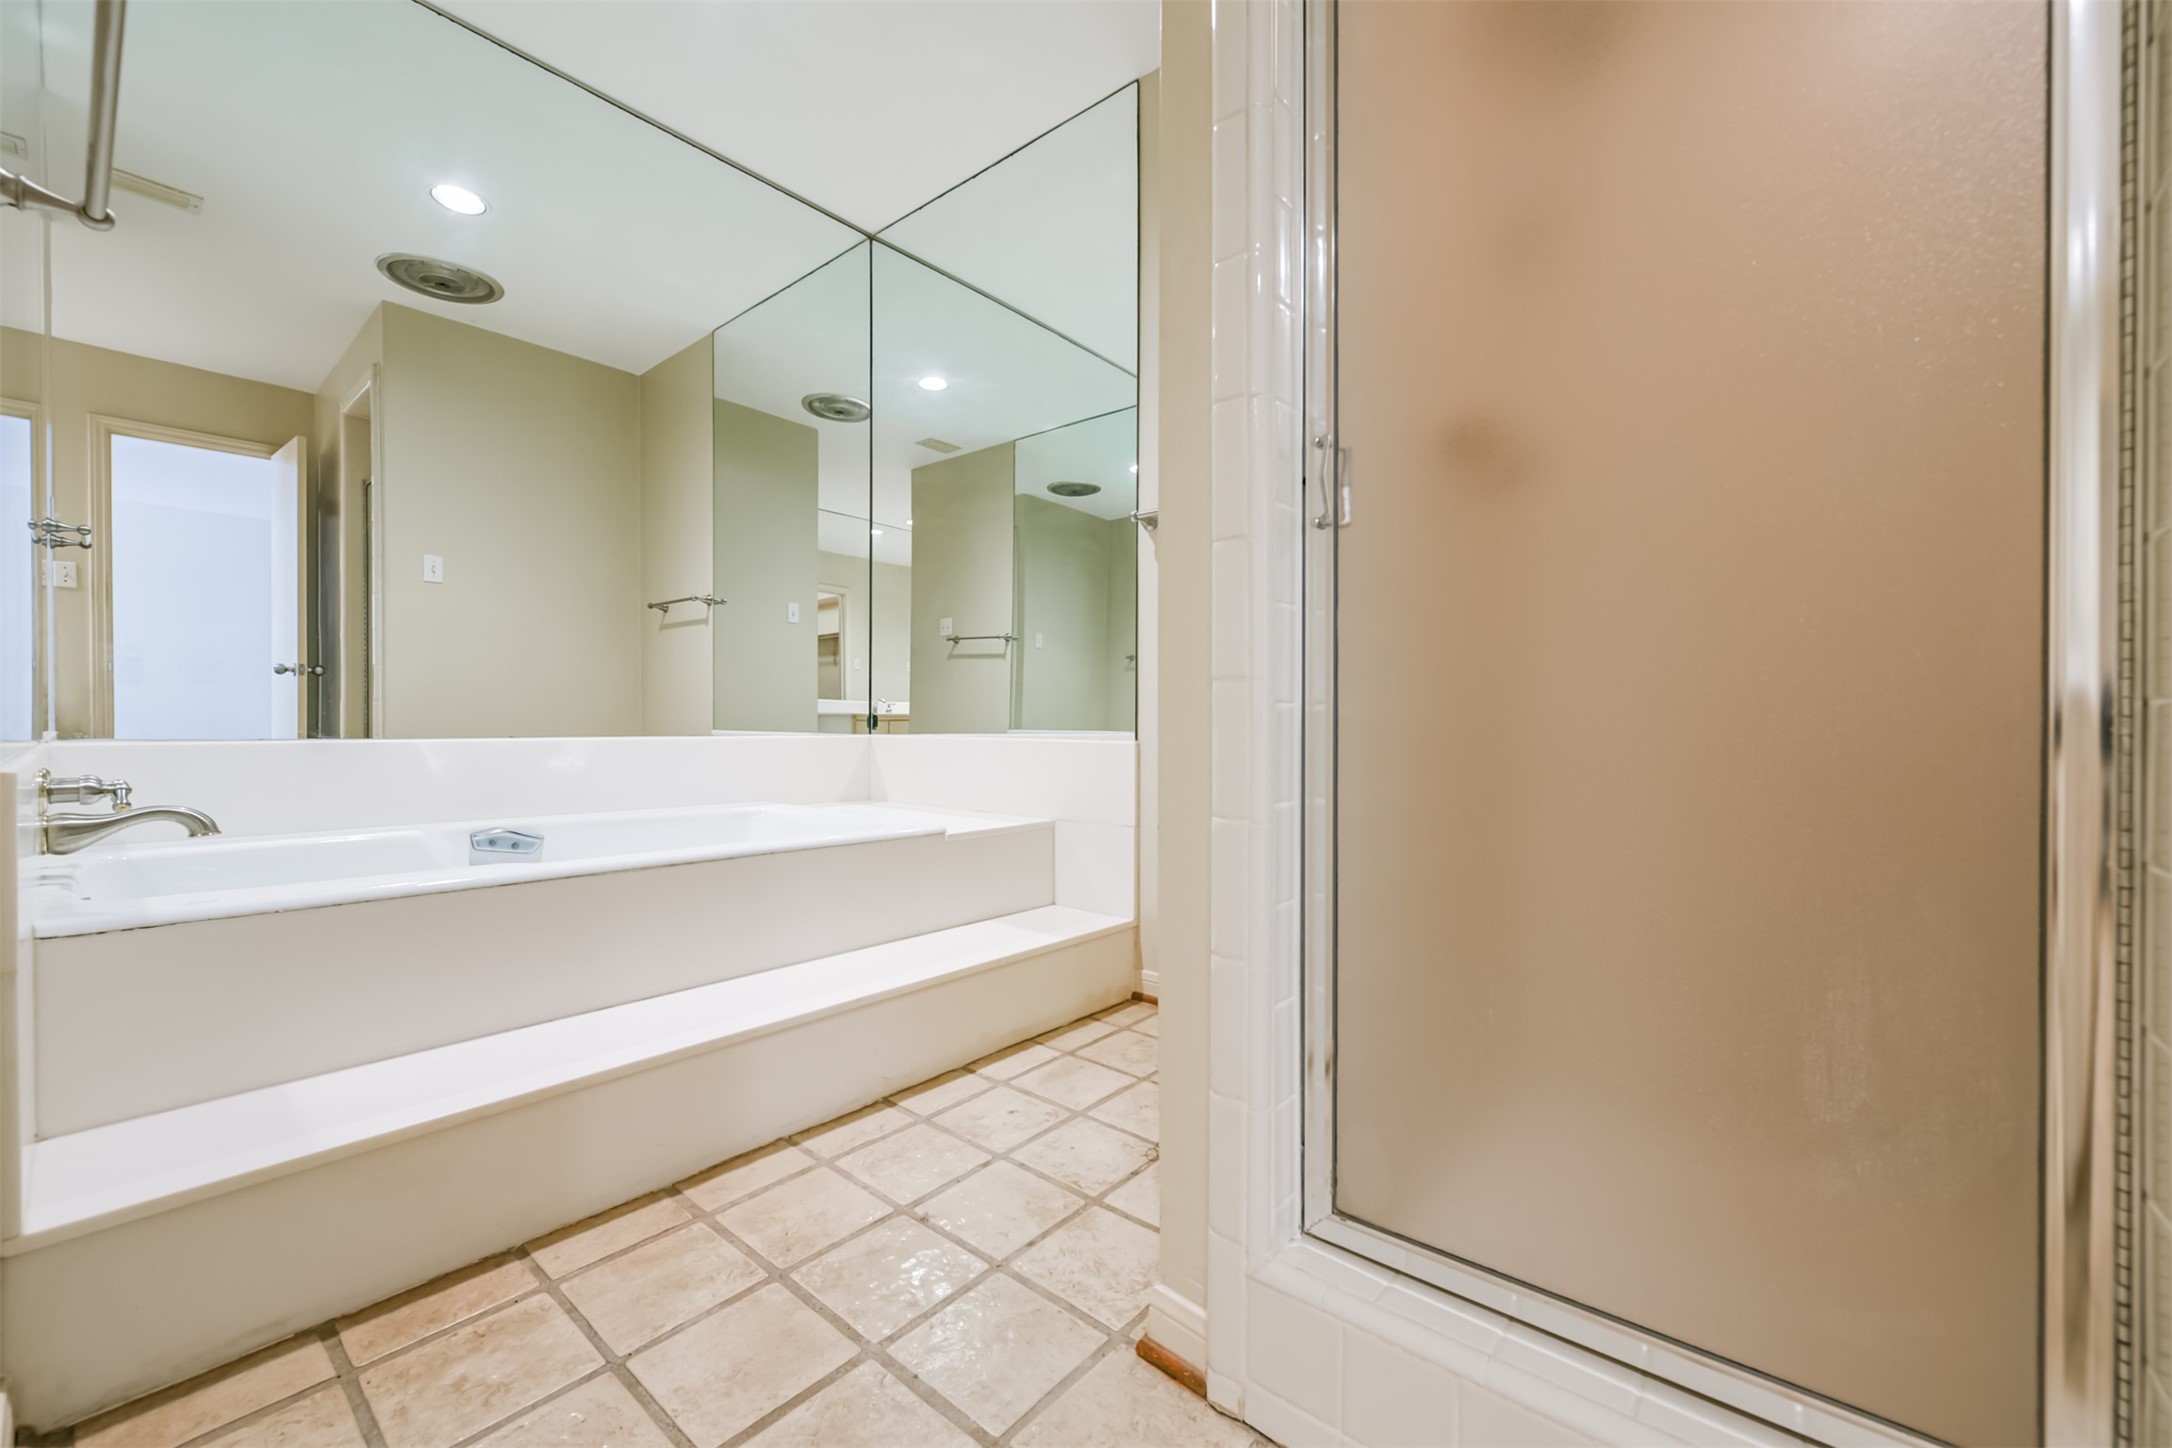 The Primary bath also has this great, long soaking tub and then separate tiled shower.